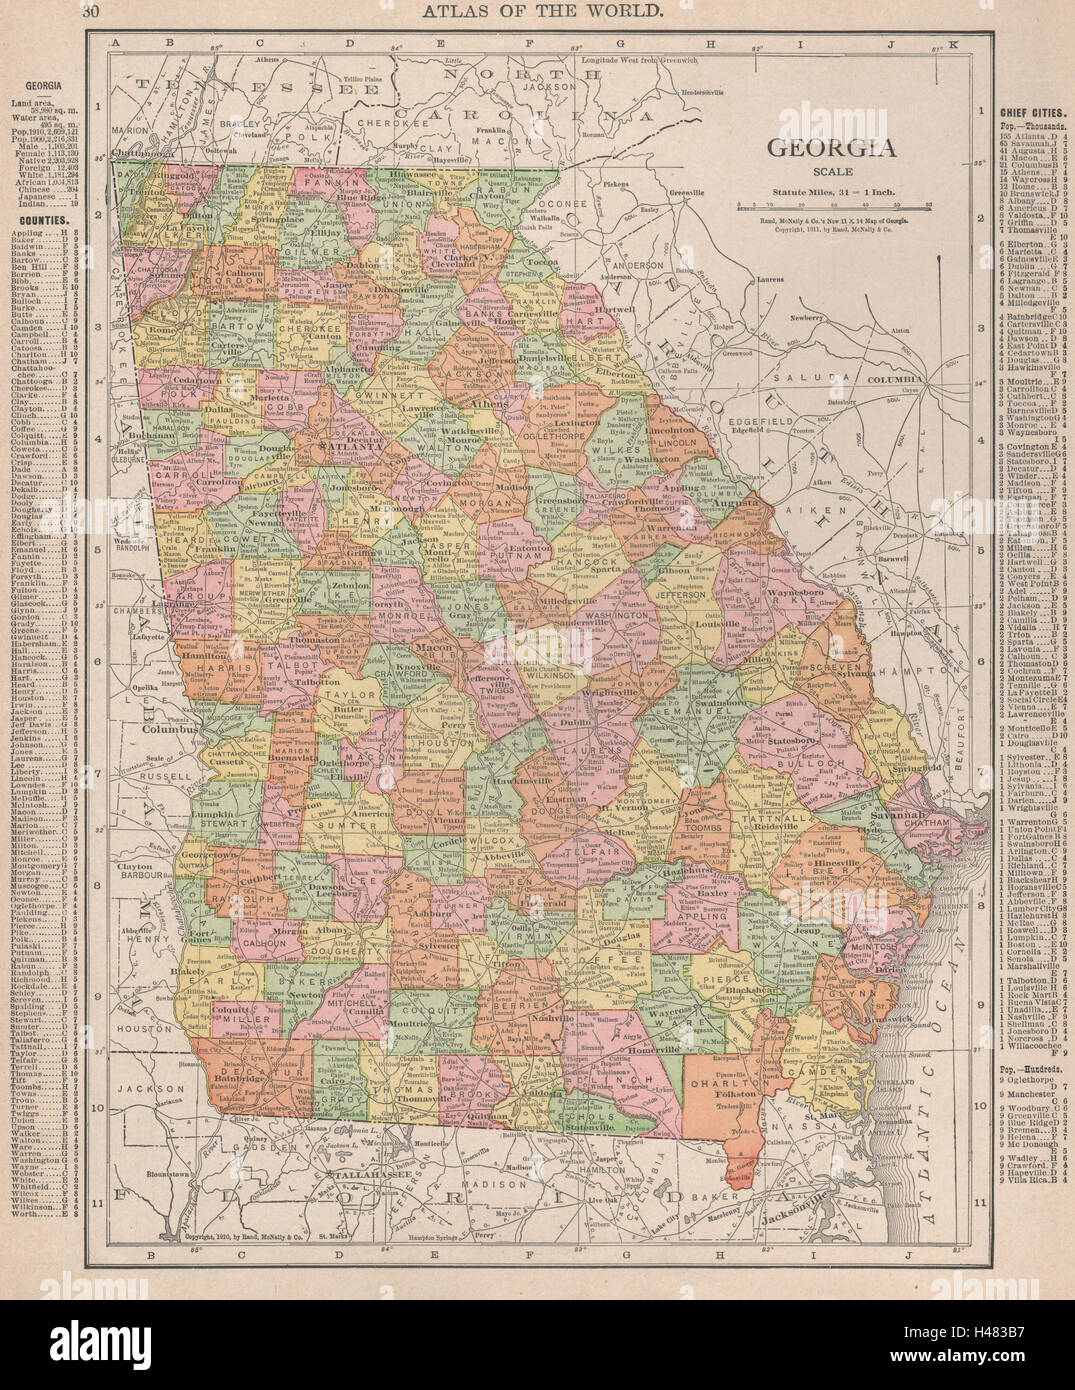 Georgia state map showing counties. RAND MCNALLY 1912 old antique chart Stock Photo